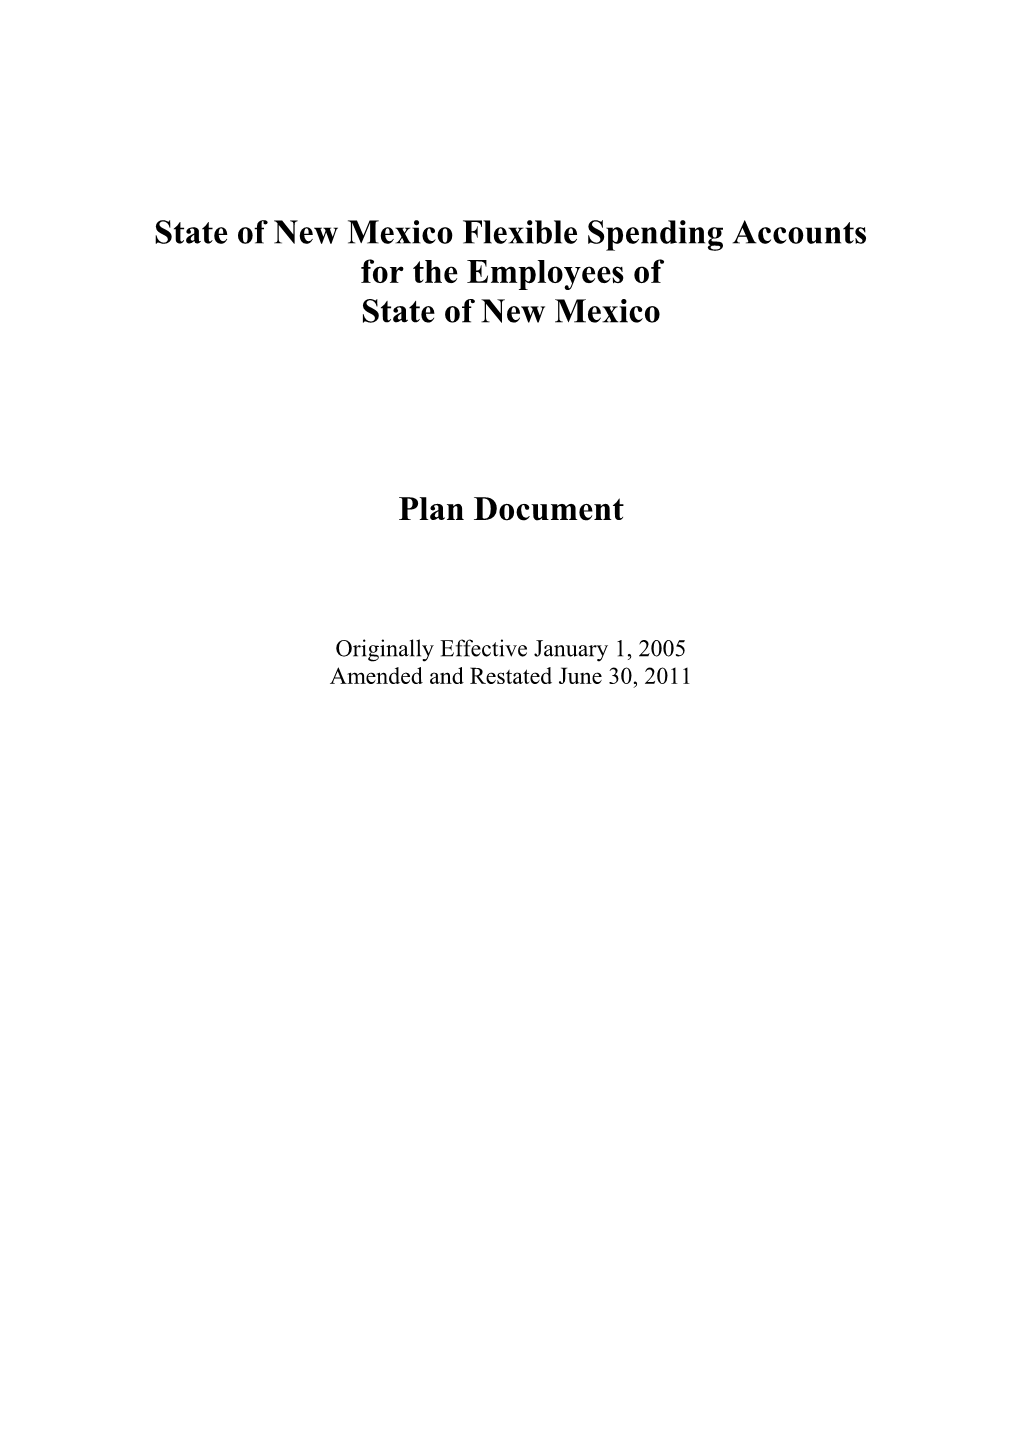 State of New Mexico Flexible Spending Accounts